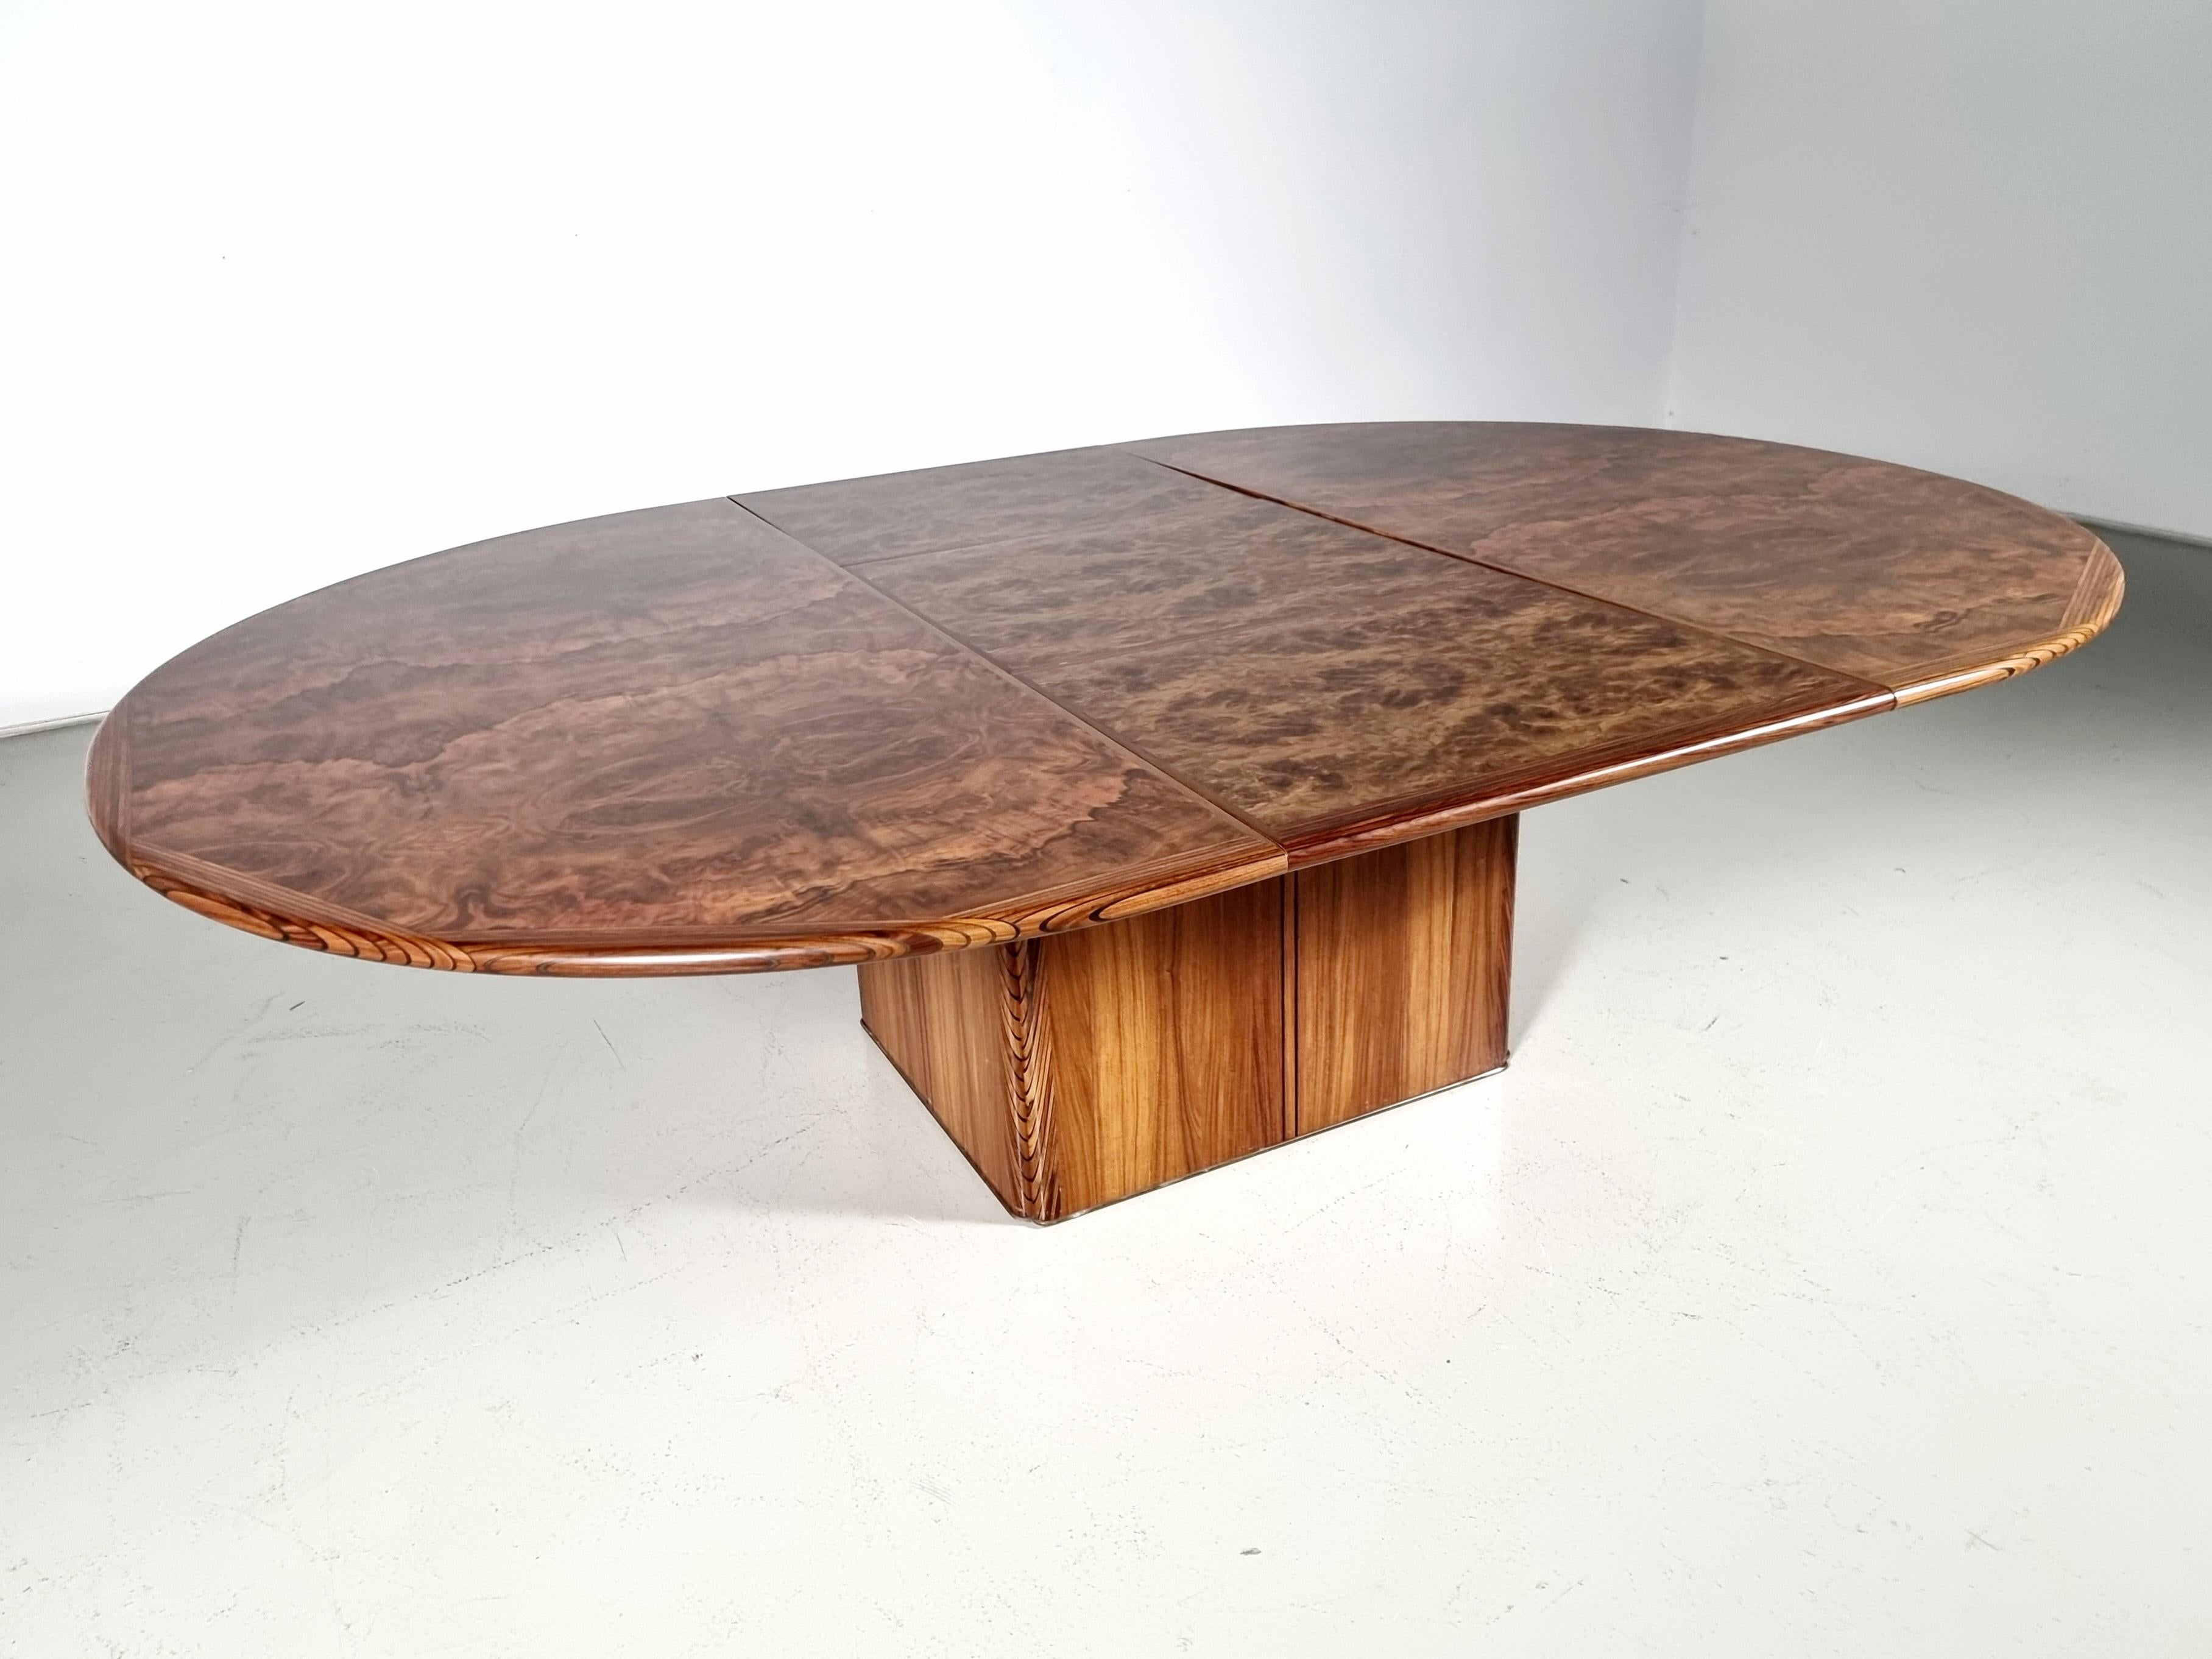 Artona 'Africa' dining set by Tobia Scarpa in walnut wood and leather, Maxalto For Sale 1